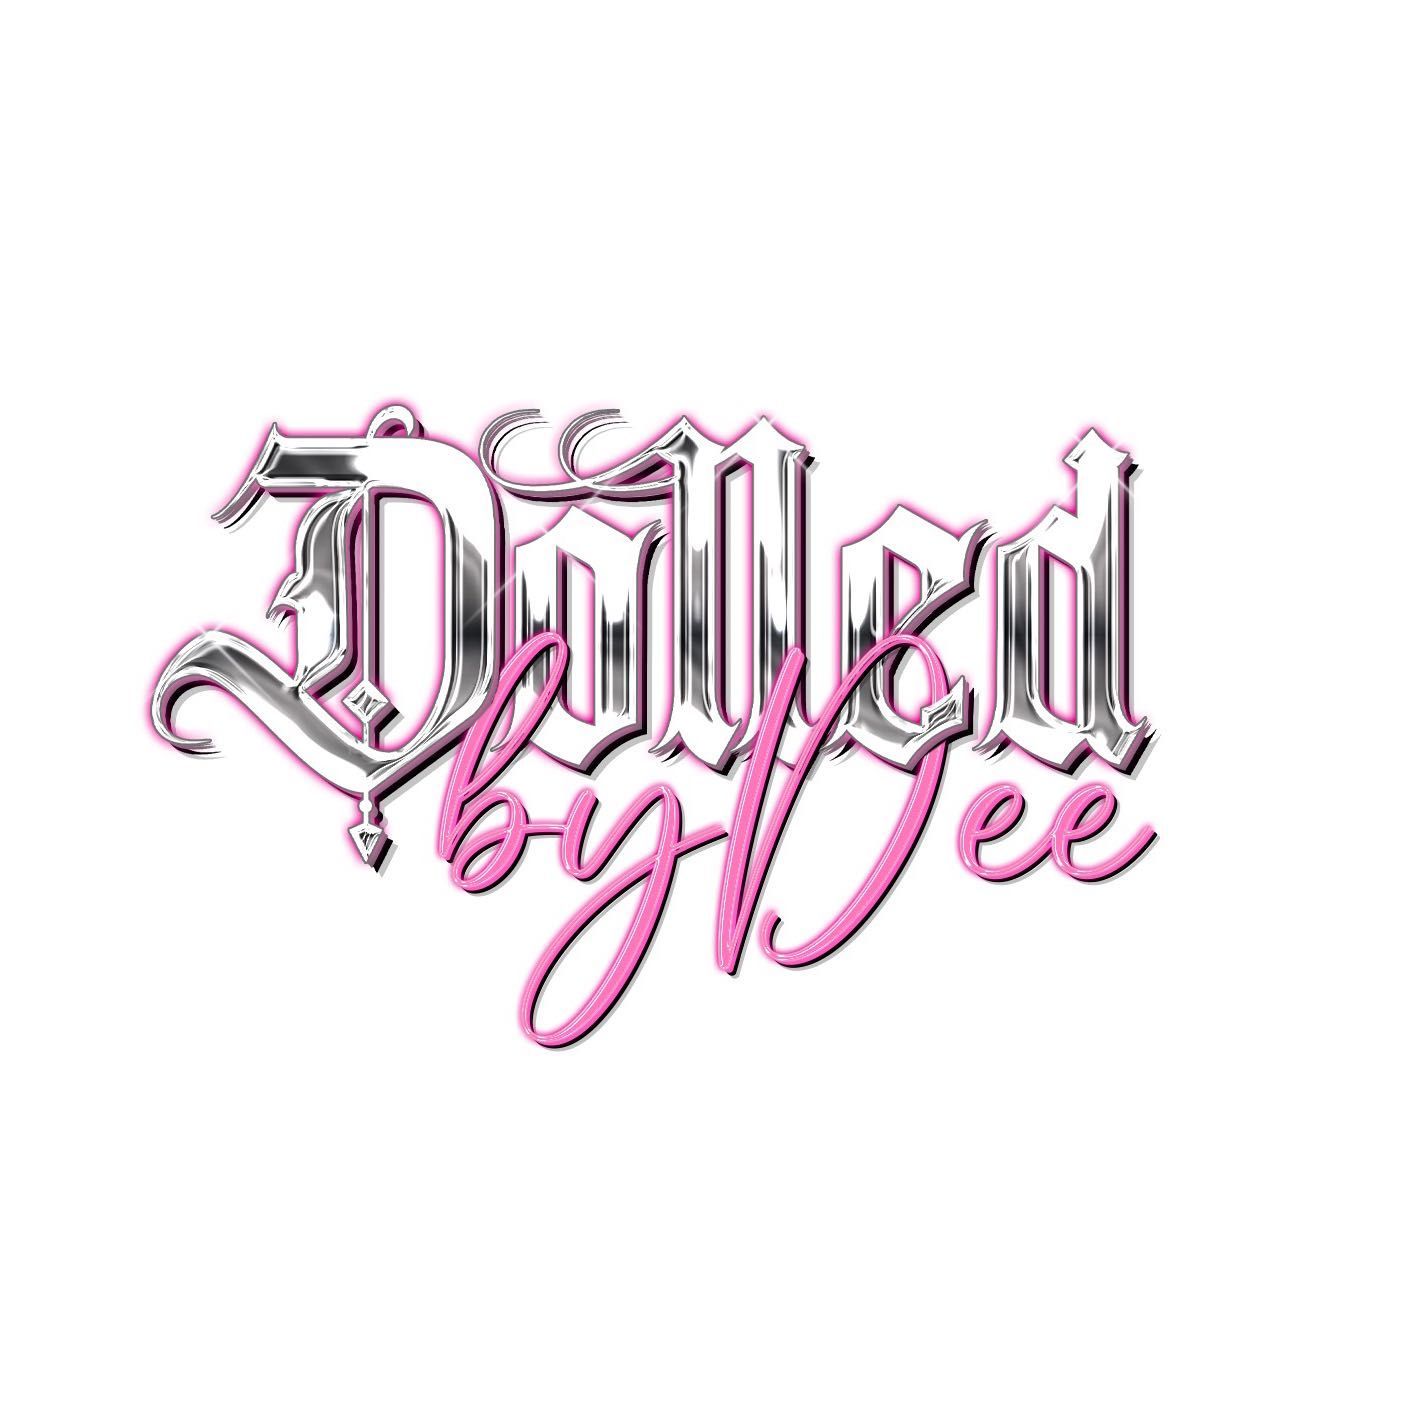 Dolled By Dee, 12160 W Sunrise Blvd, Suite 120, Plantation, 33323